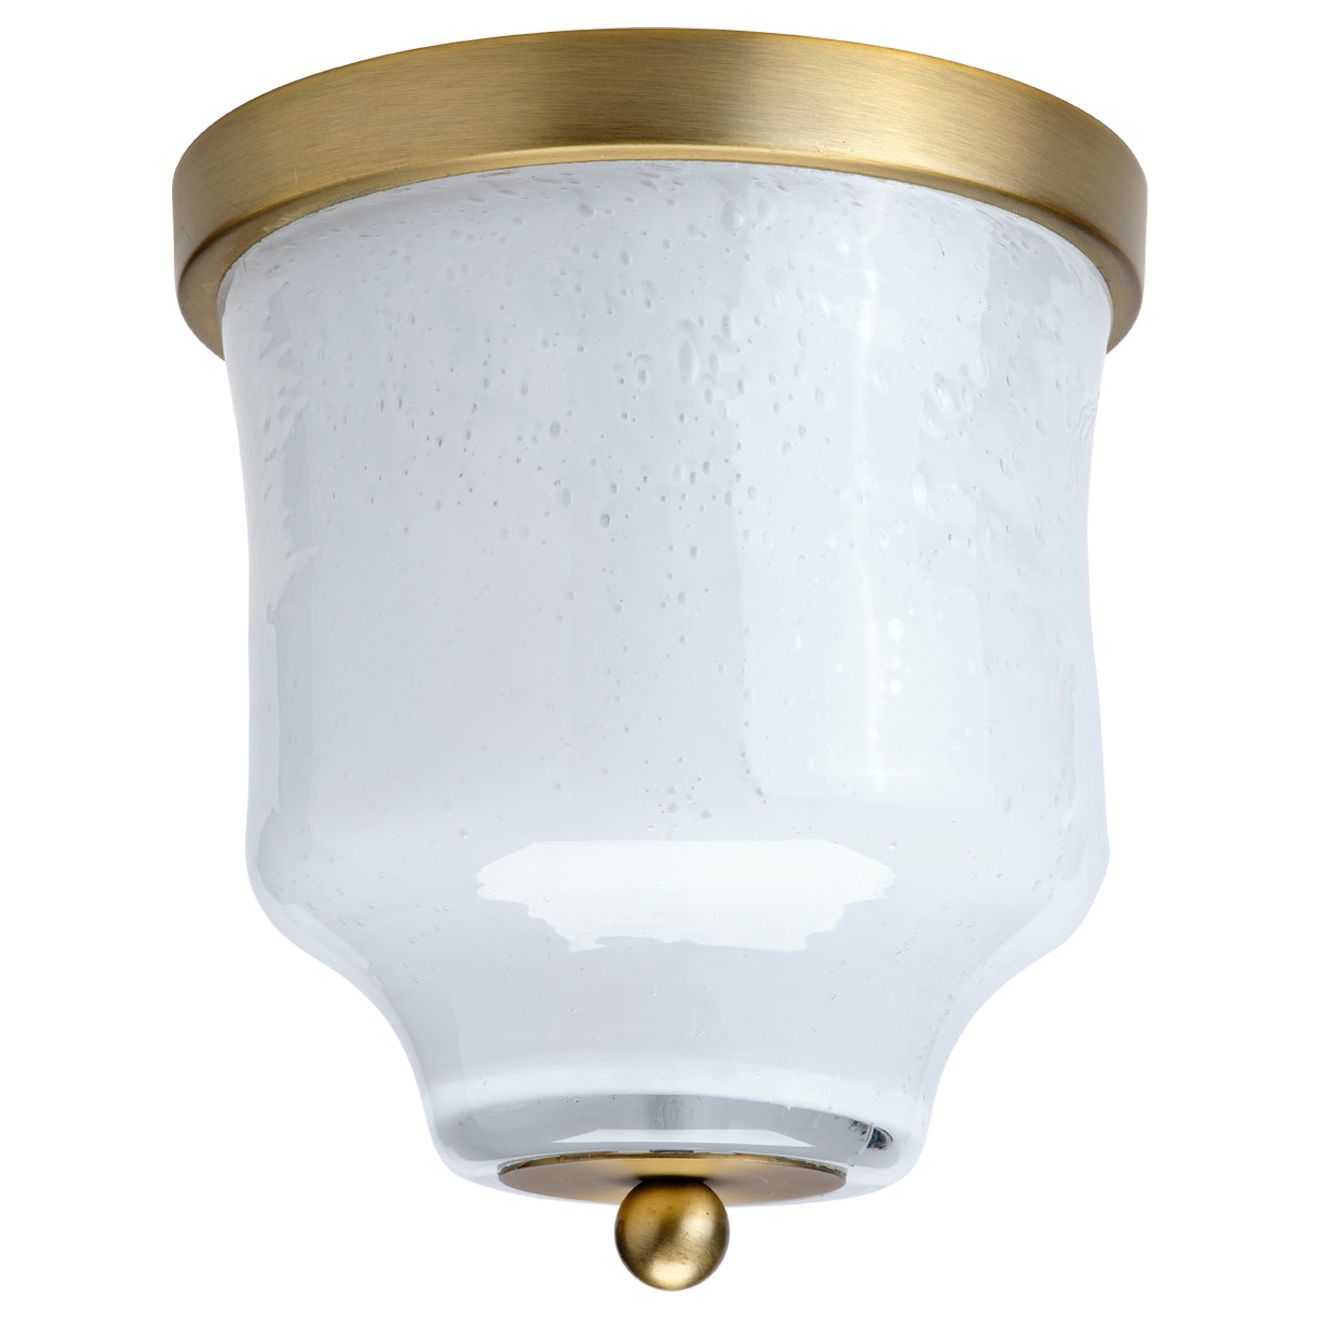 Jamie Young Company - 5SIDR-WHAB - Sidra Flush Mount - Sidra - Antique Brass and White Glass